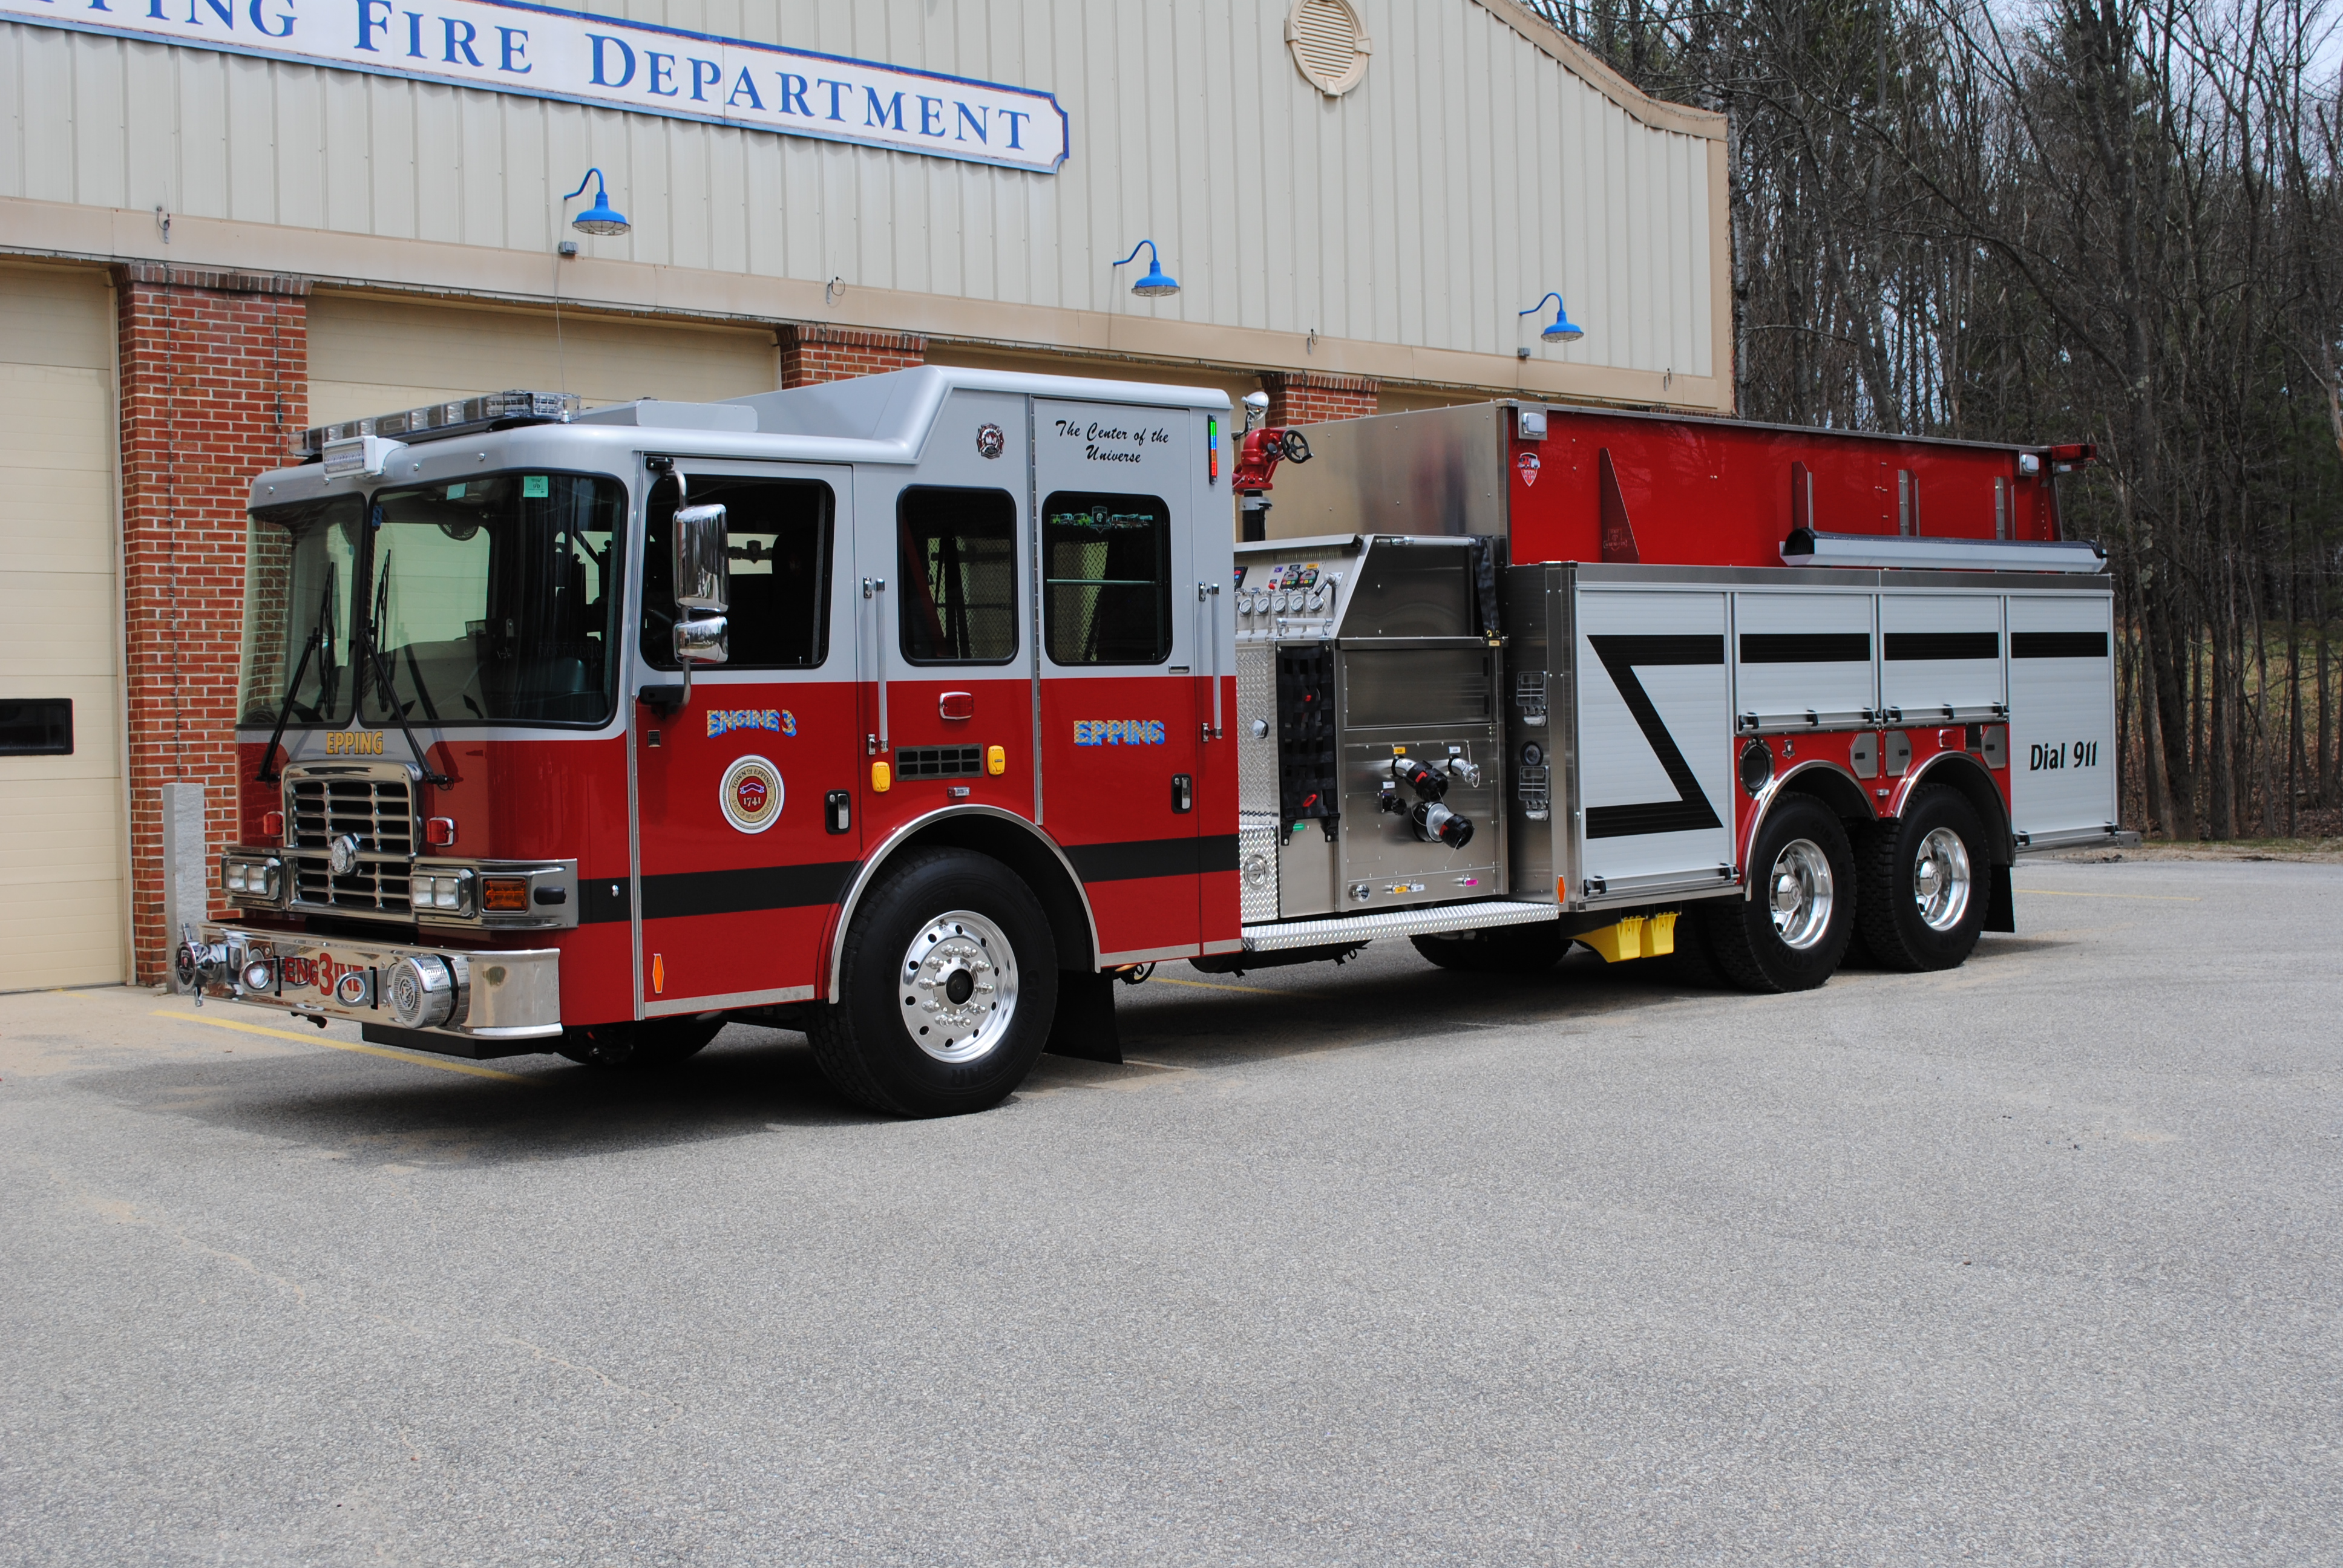 Epping Fire Department, NH – #22565